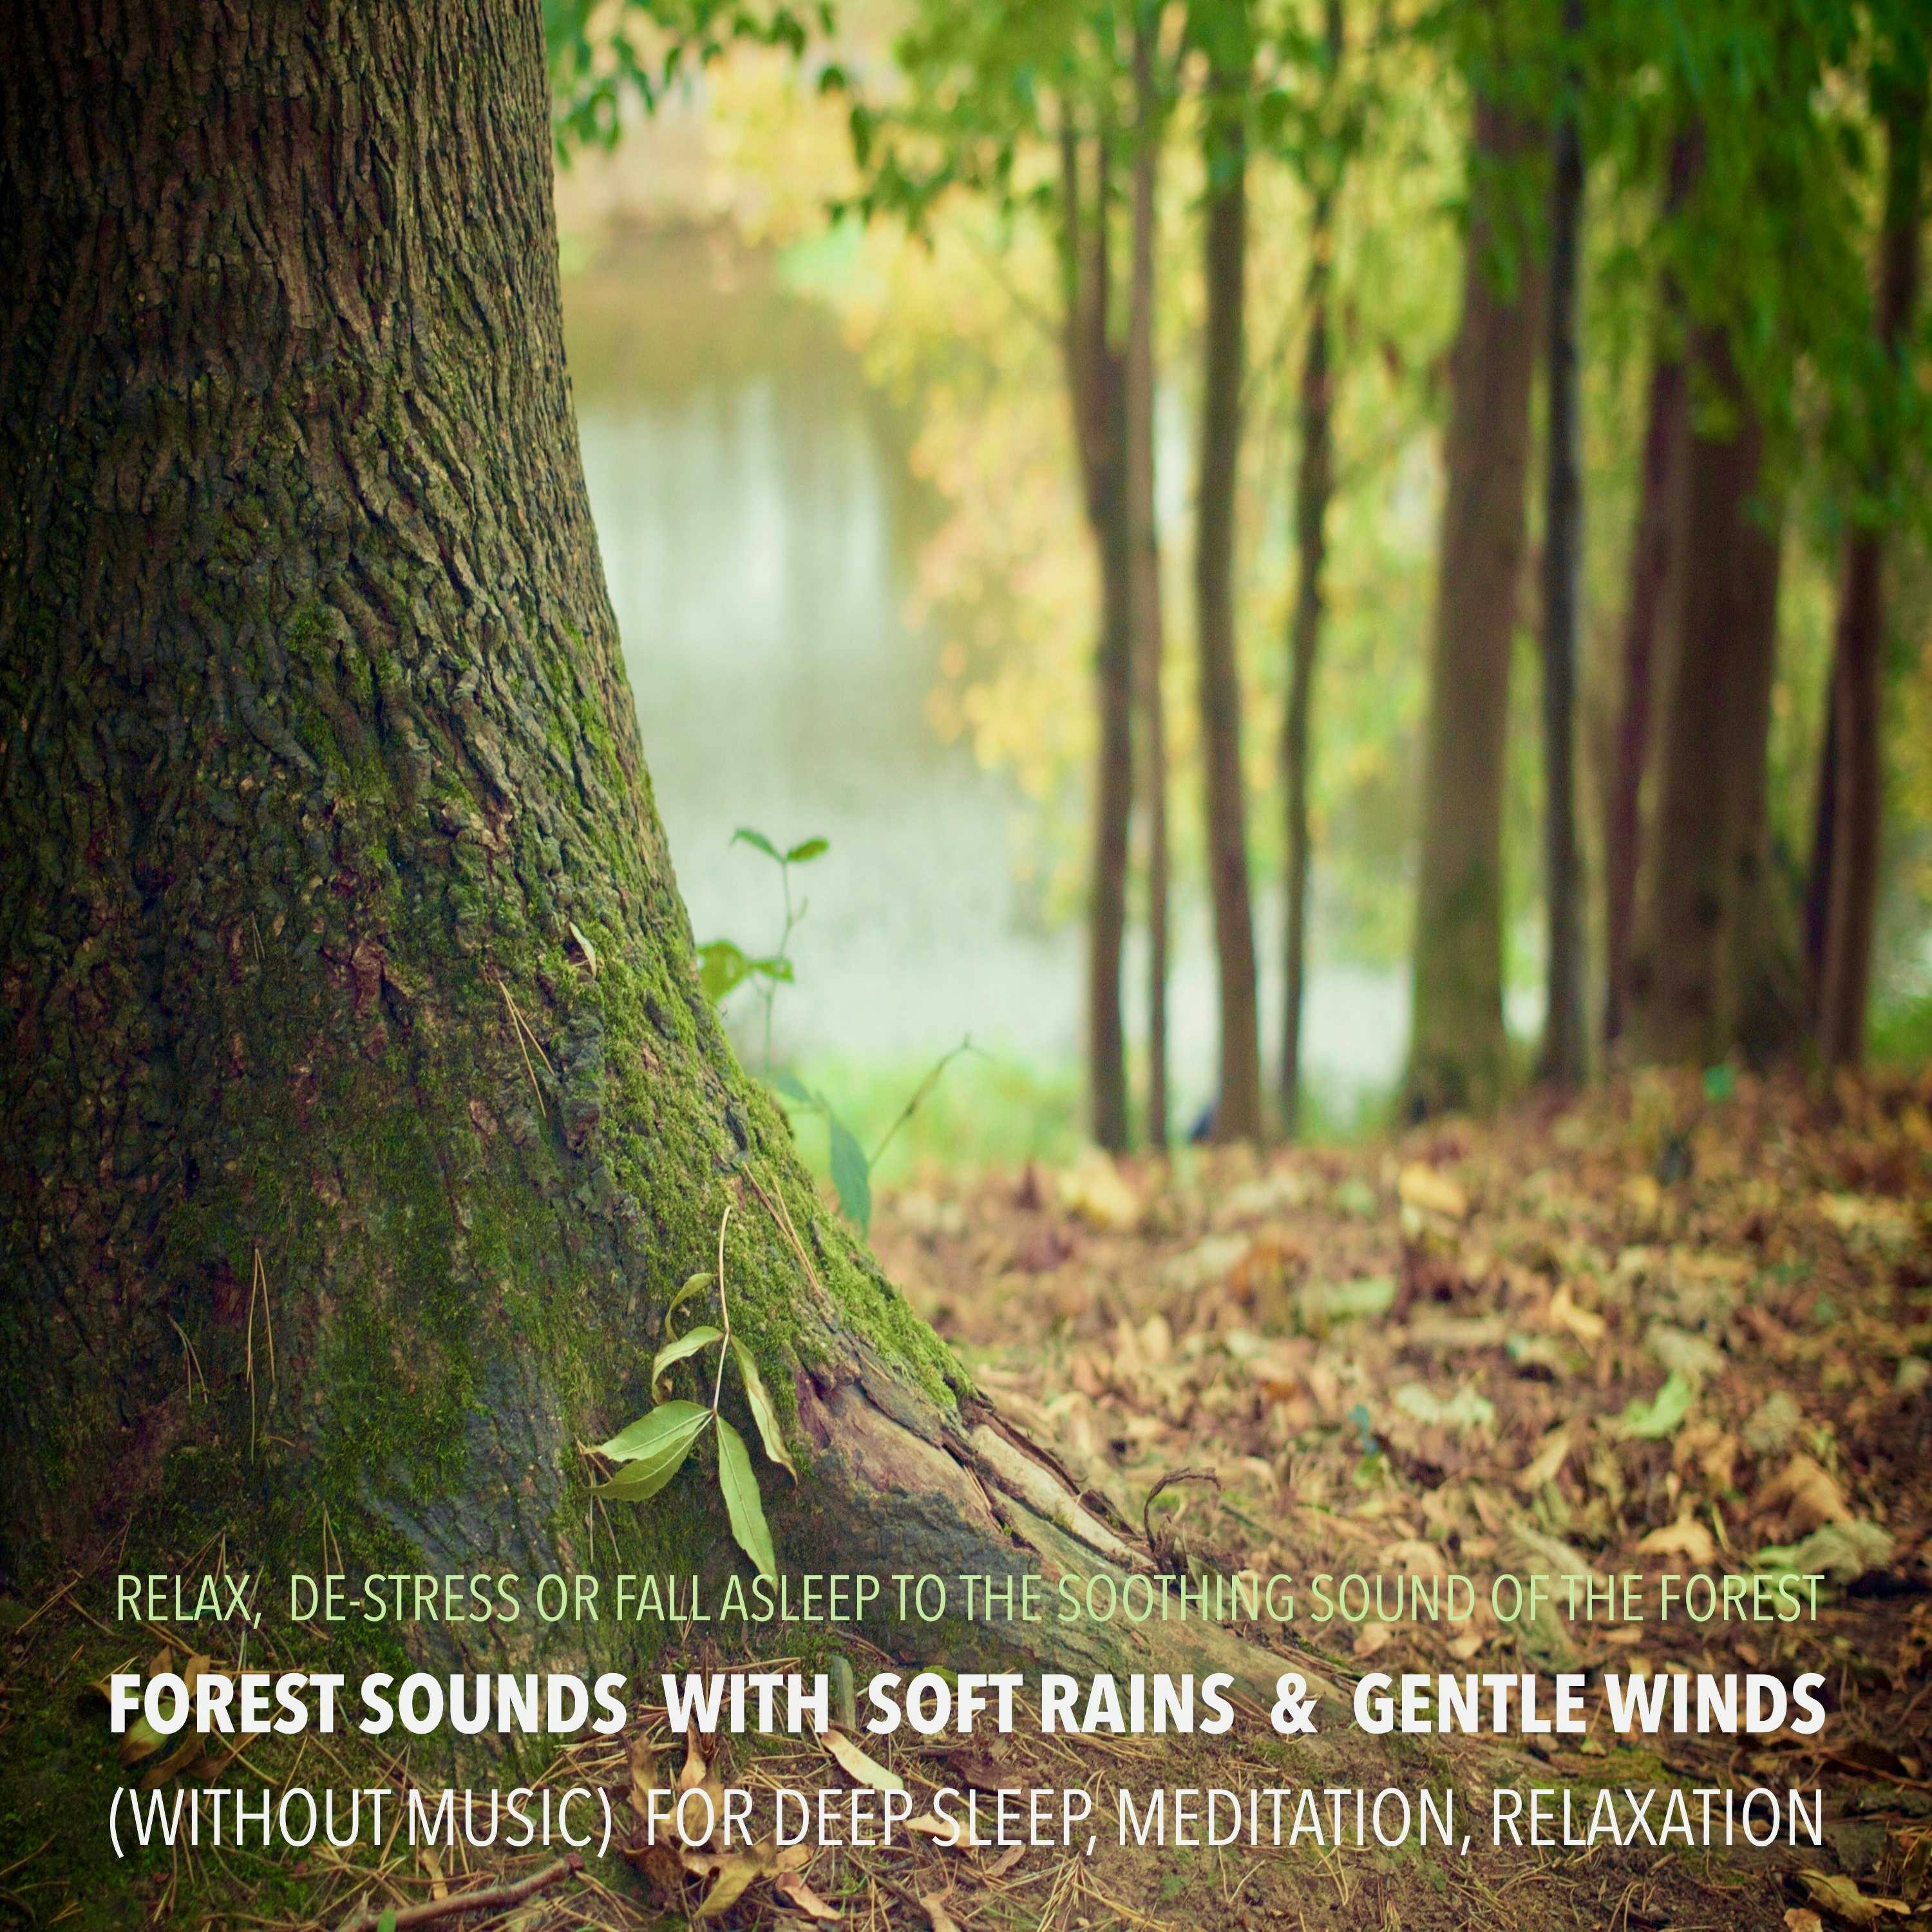 Forest Sounds with Soft Rains & Gentle Winds (without music) for Deep Sleep, Meditation, Relaxation: Relax, De-stress Or Fall Asleep To The Soothing Sounds Of Nature - undefined